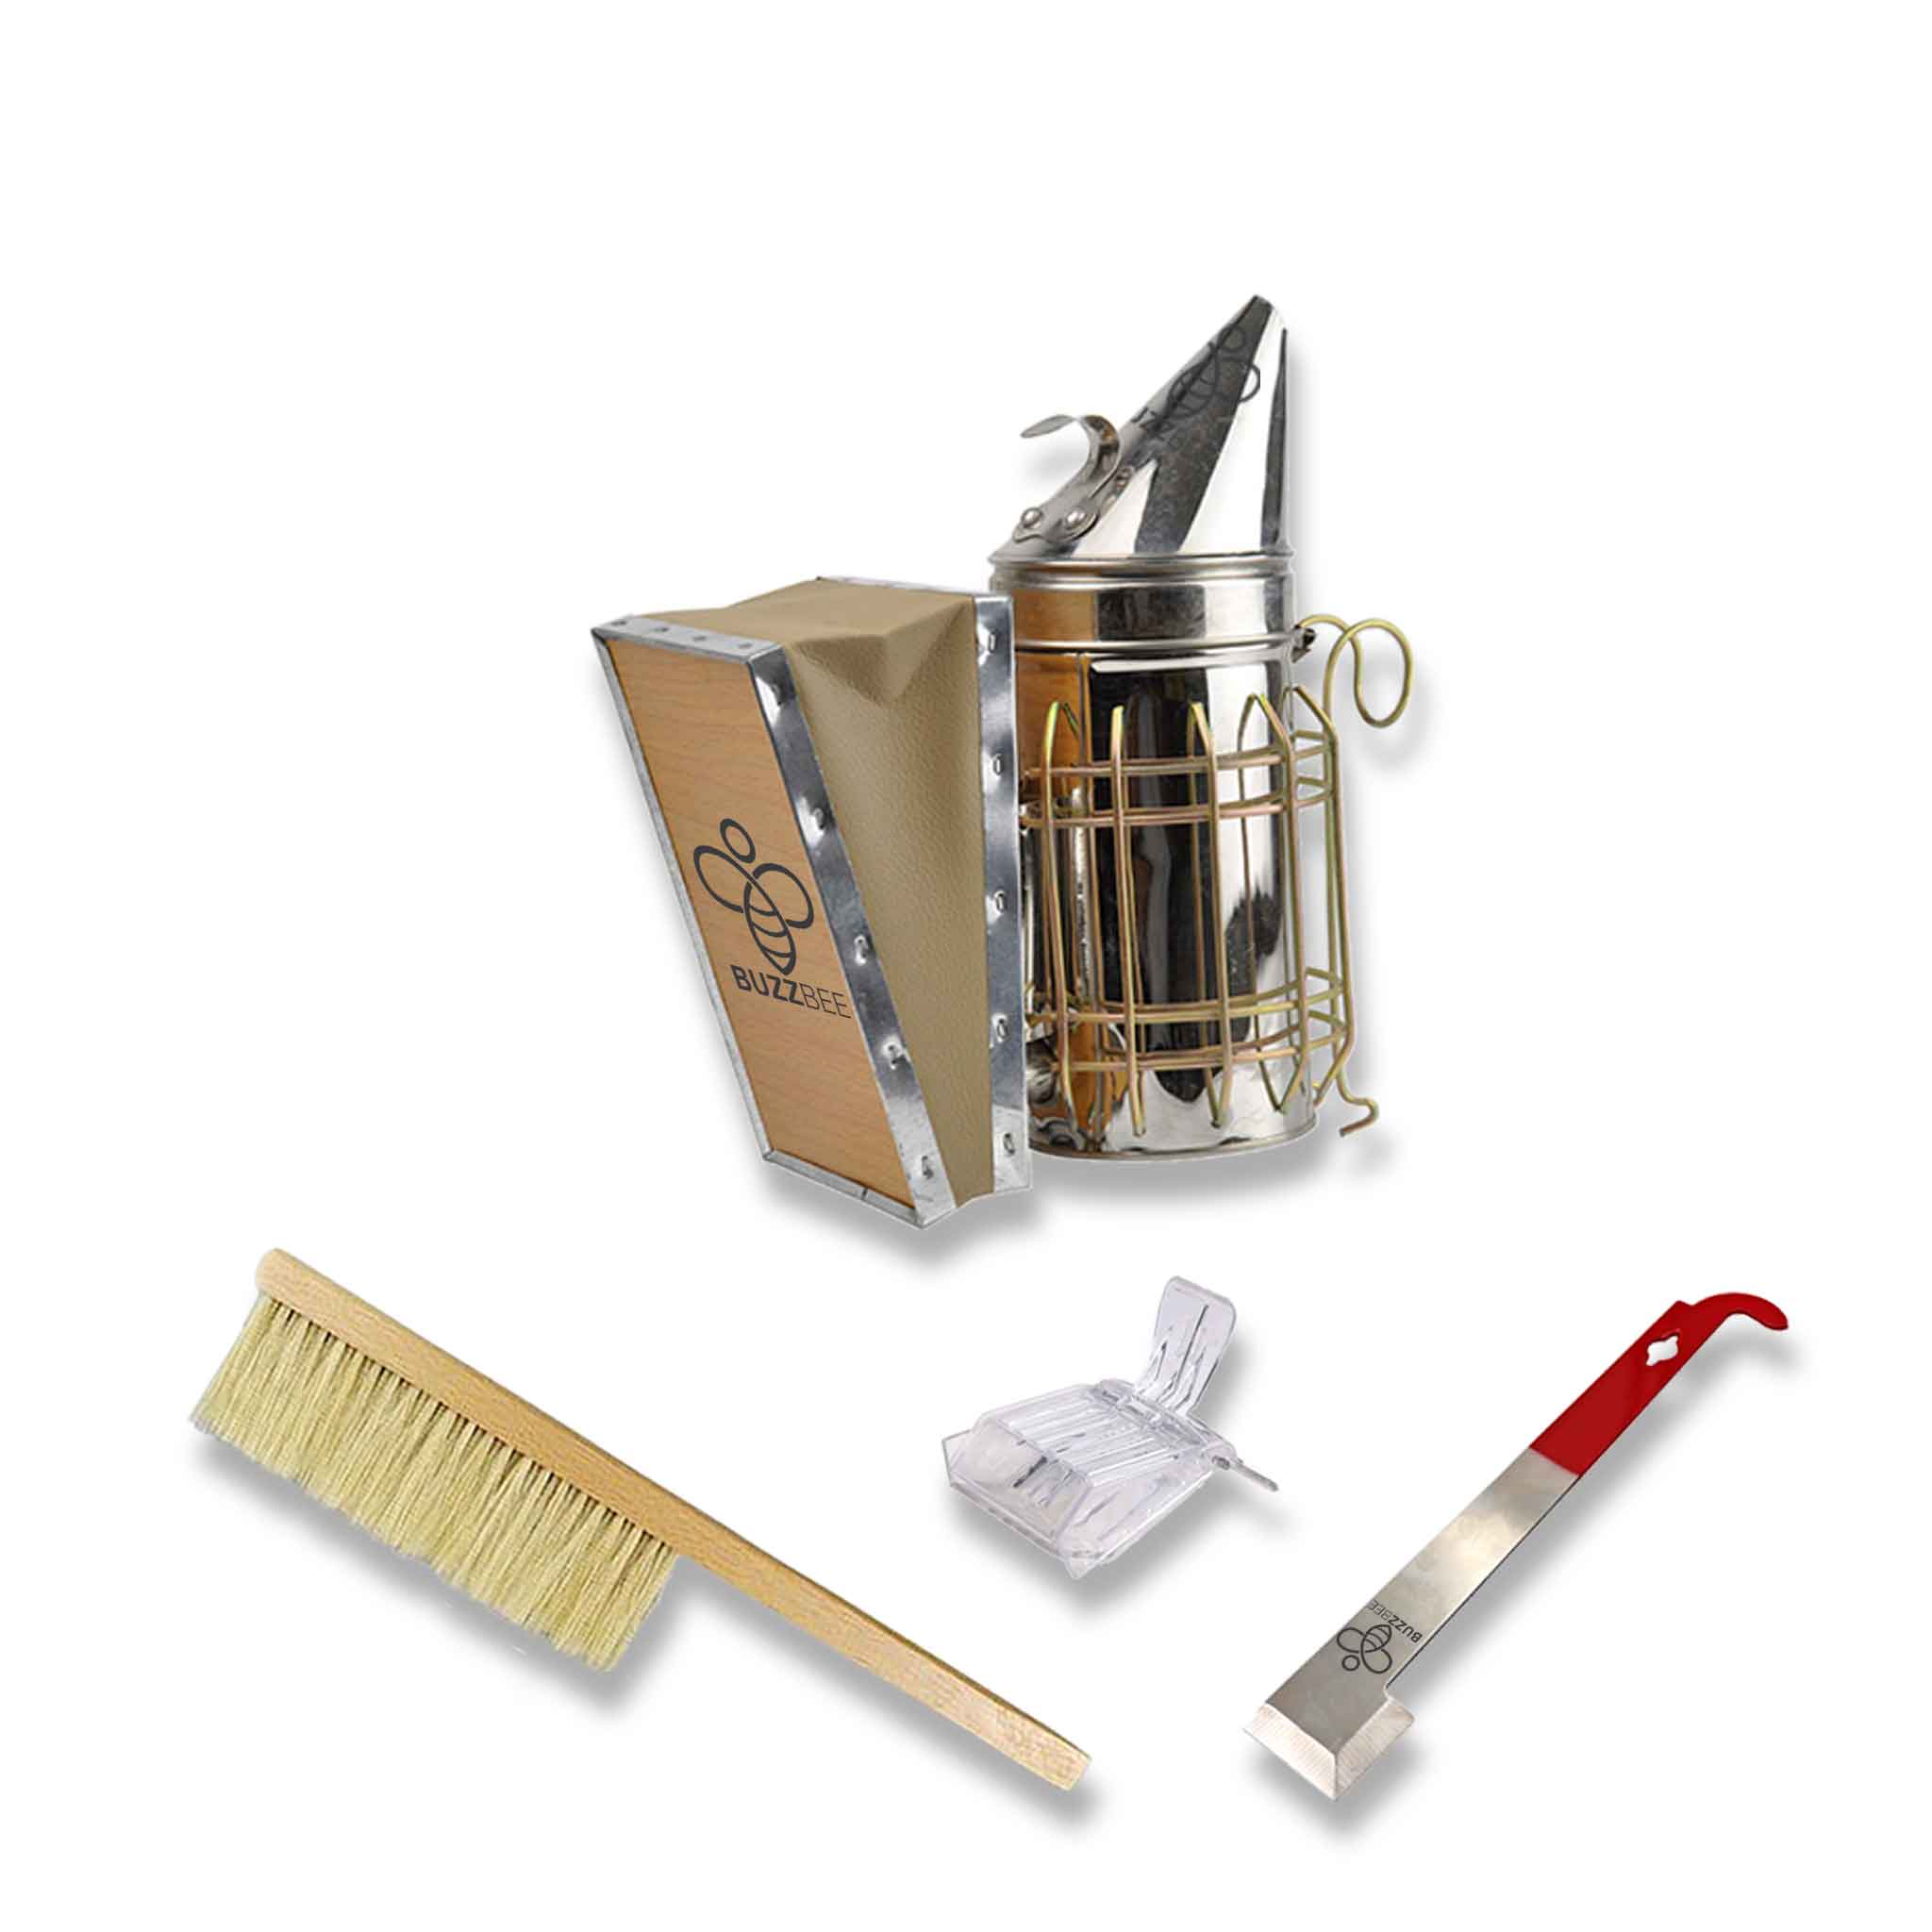 Beekeeping Starter Accessories Kits -  collection by Buzzbee Beekeeping Supplies